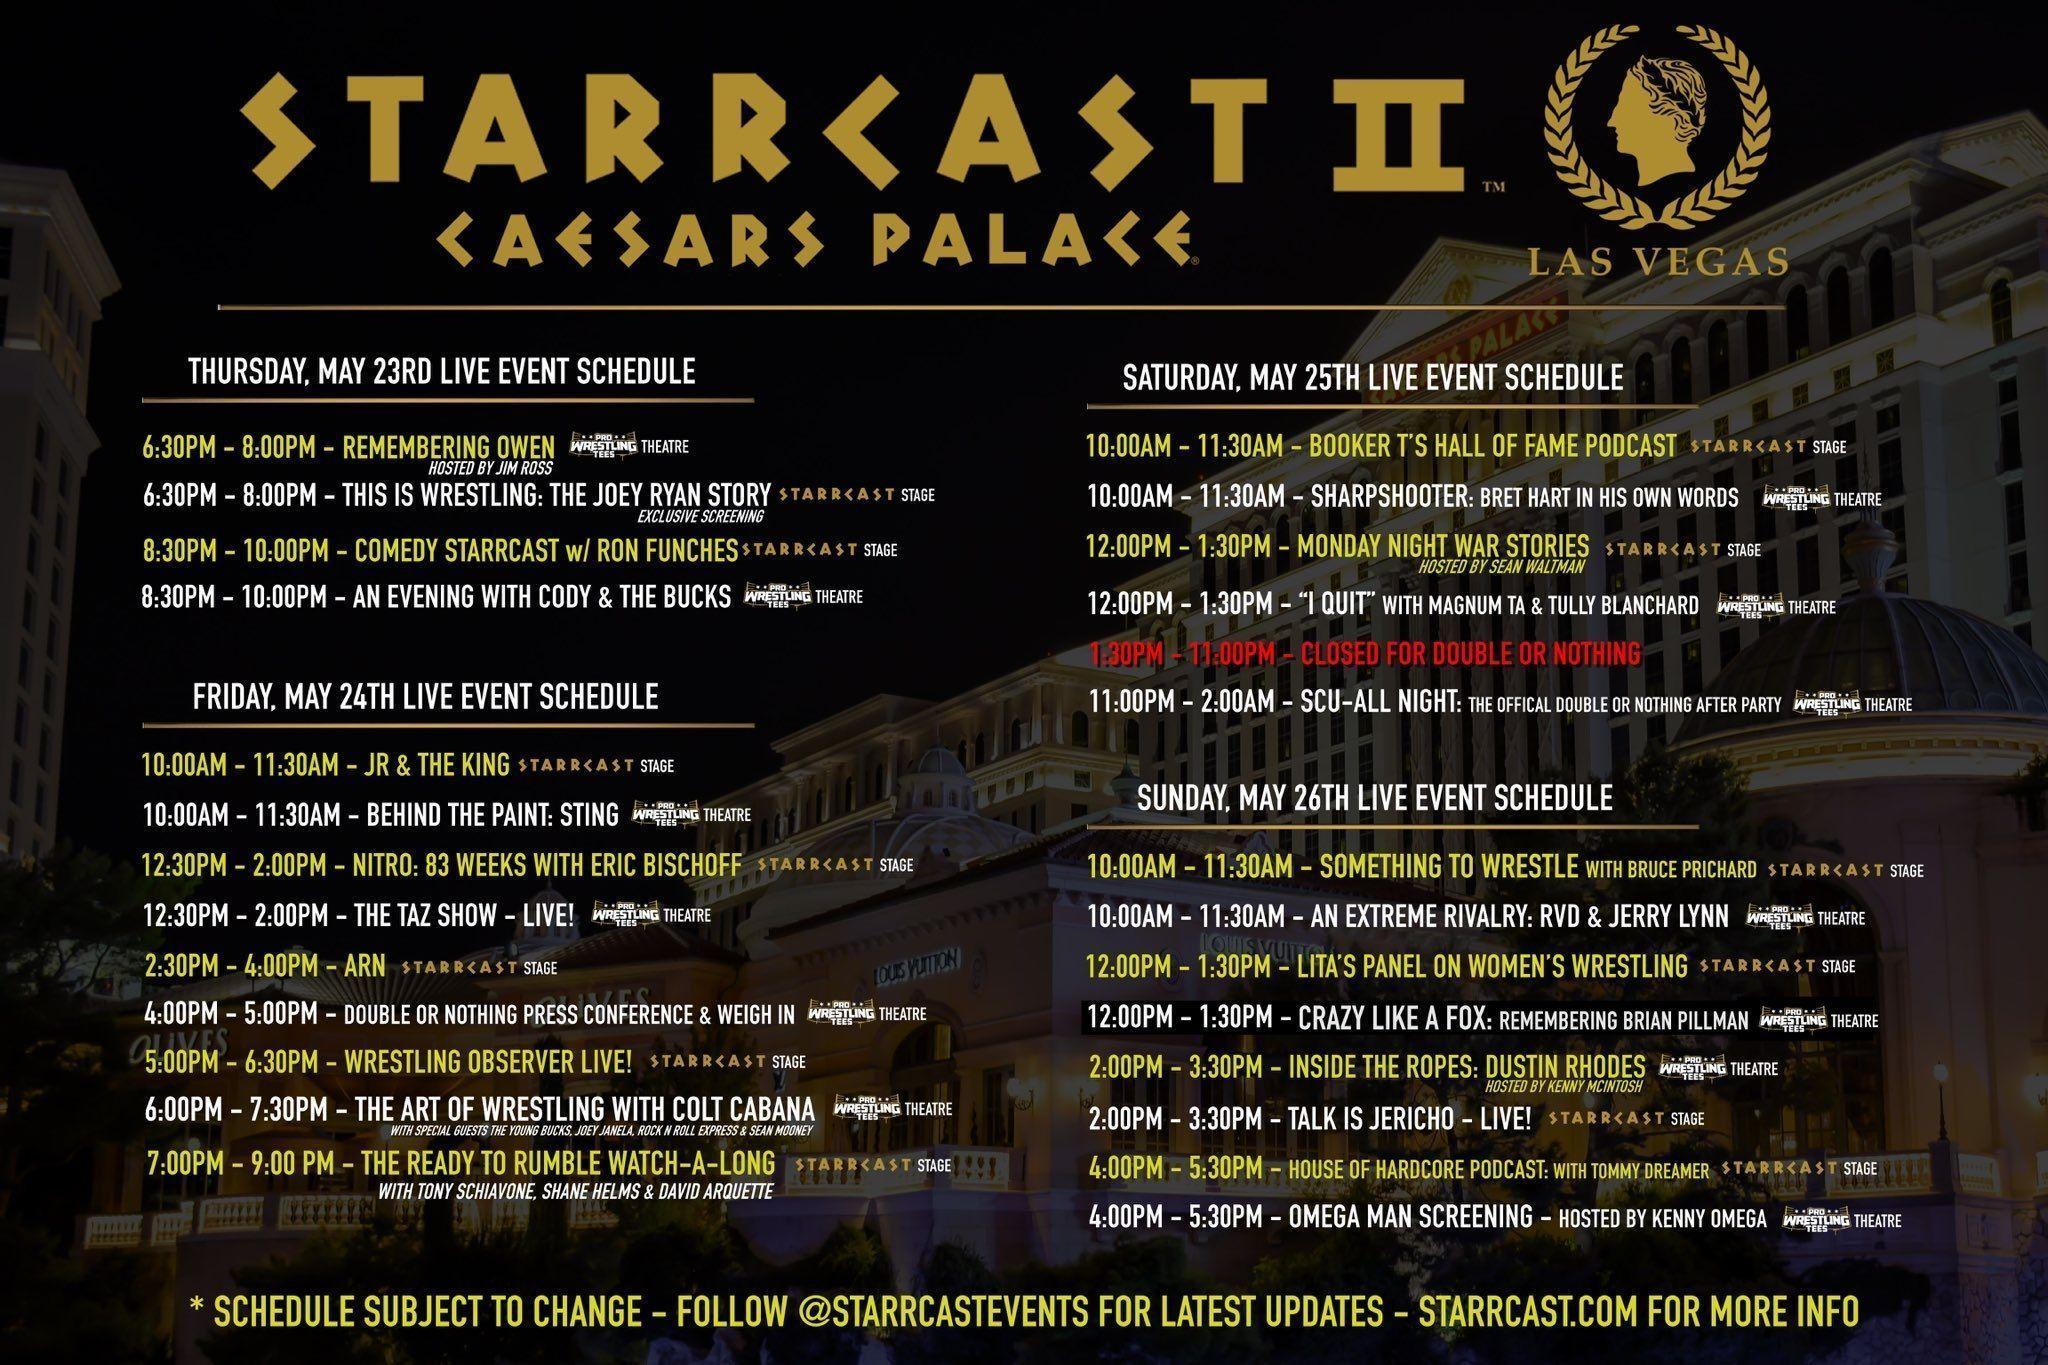 UPDATED SCHEDULE OF EVENTS FOR STARRCAST AT CAESAR’S PALACE IN LAS